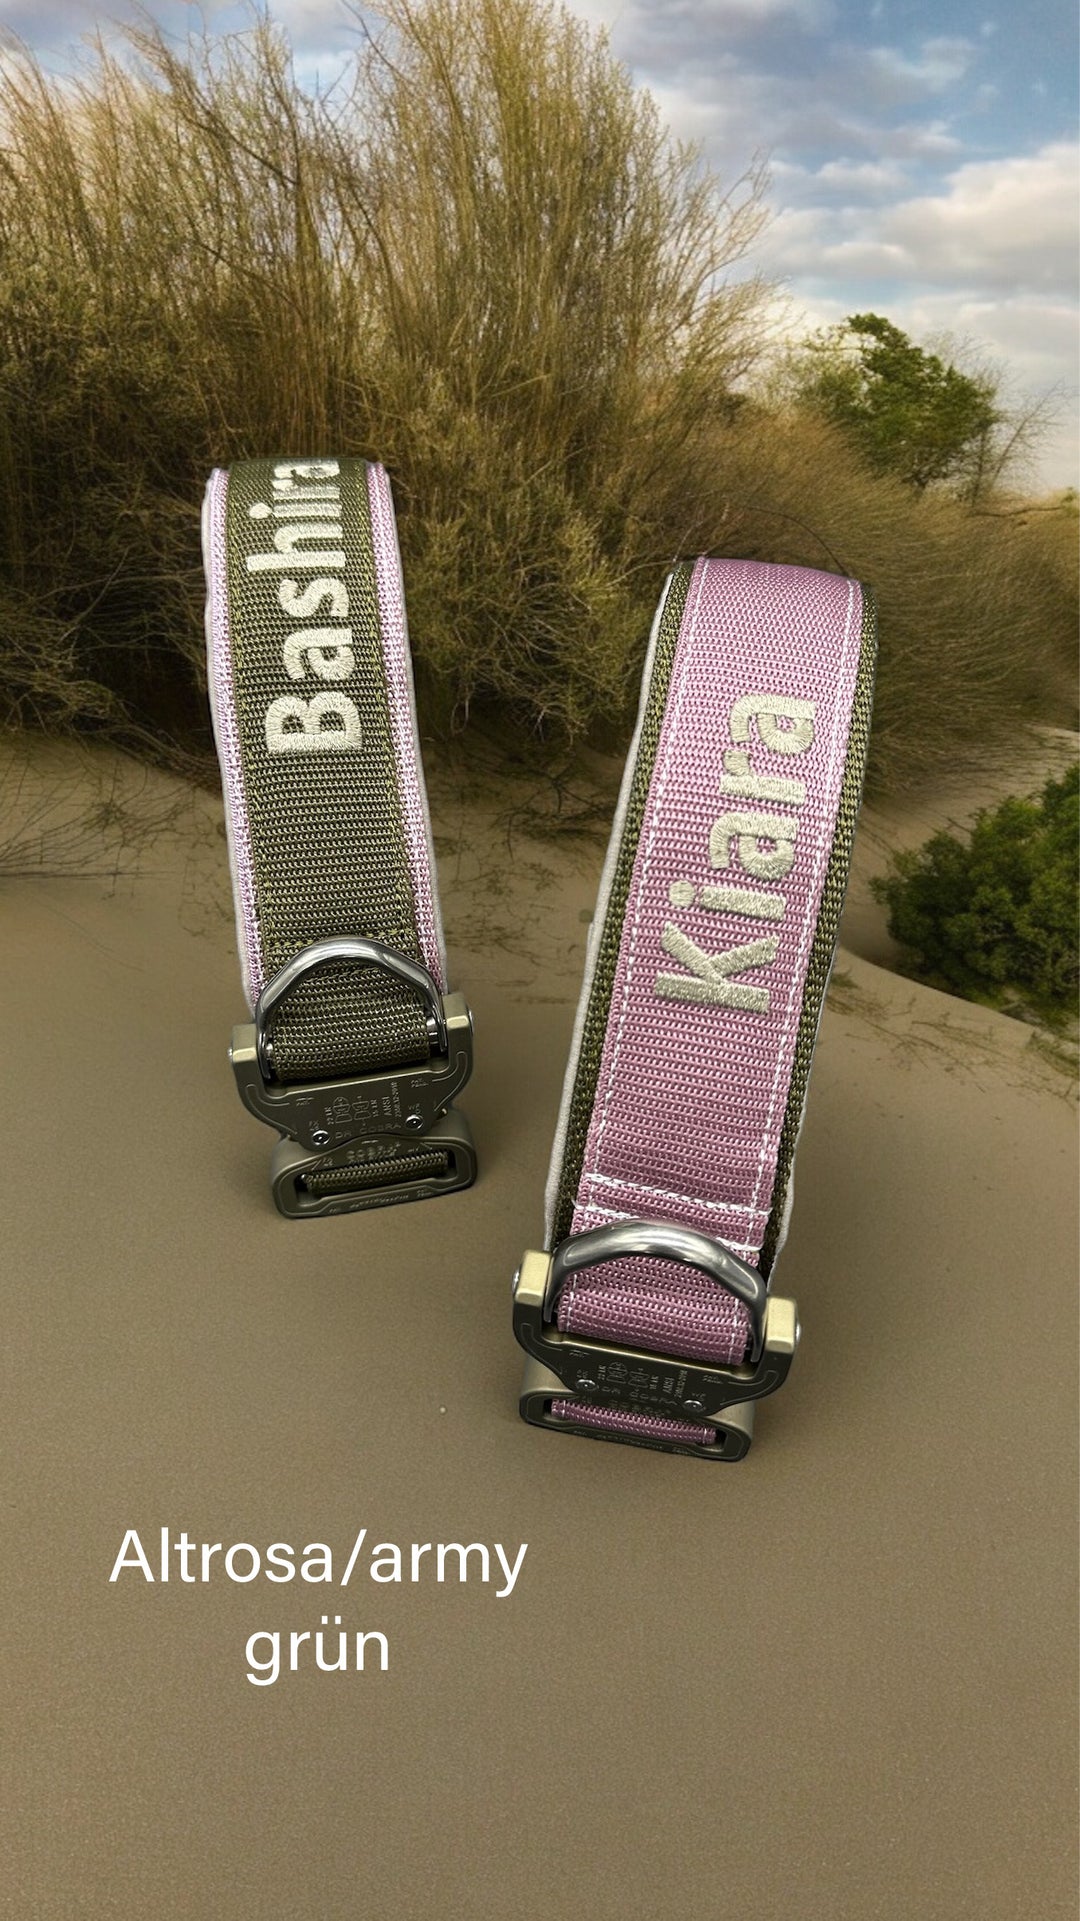 4cm wide <tc>leash</tc>n personalized with Frog 360